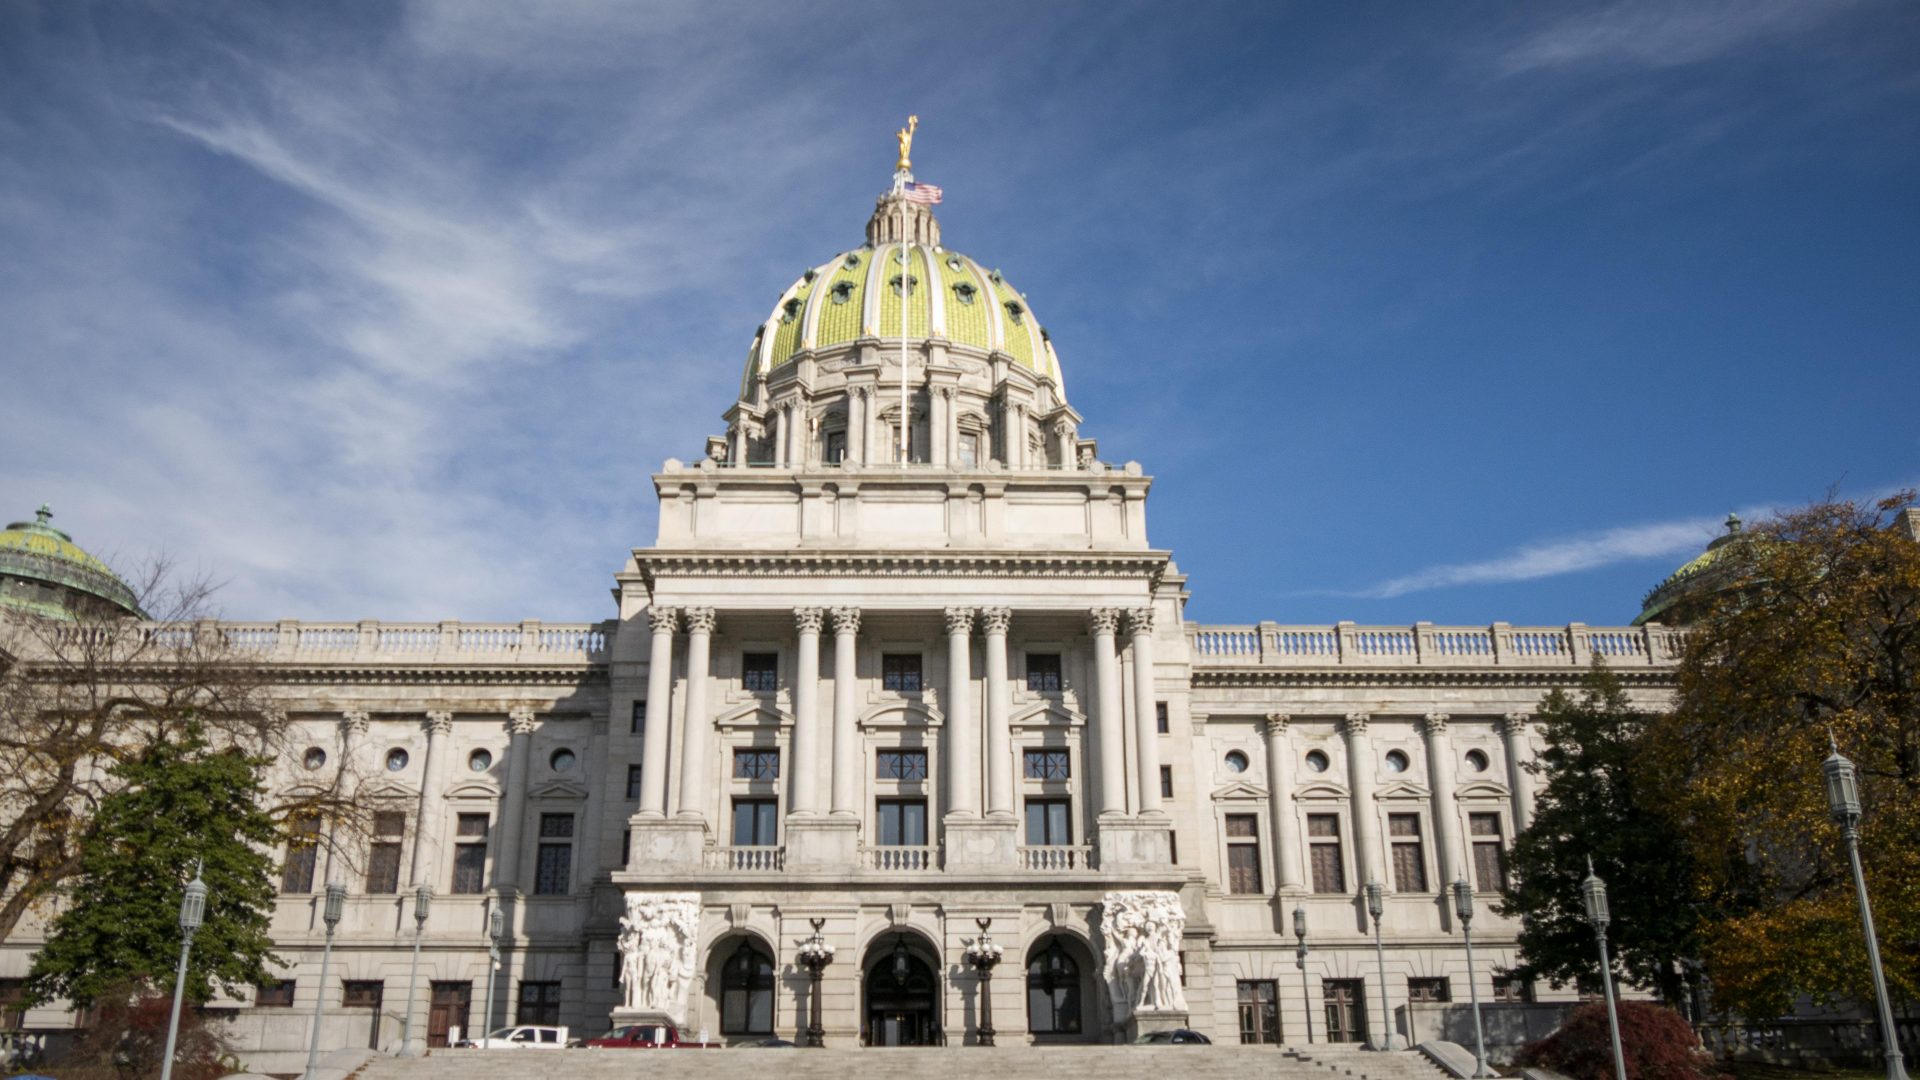 The Pennsylvania state Capitol.